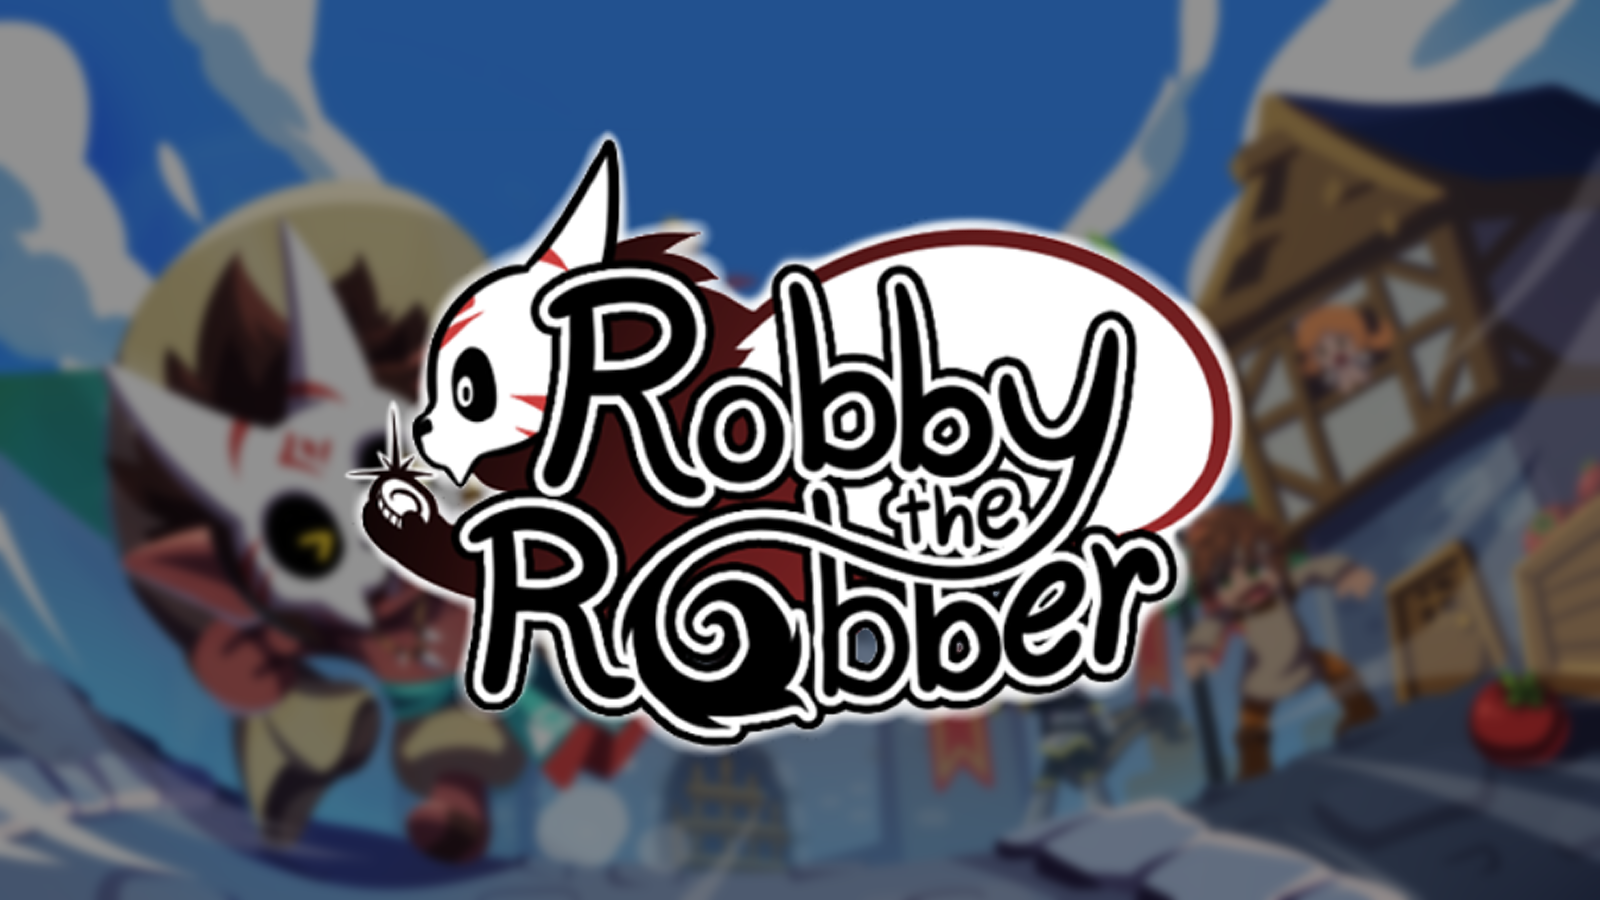 Robby The Robber